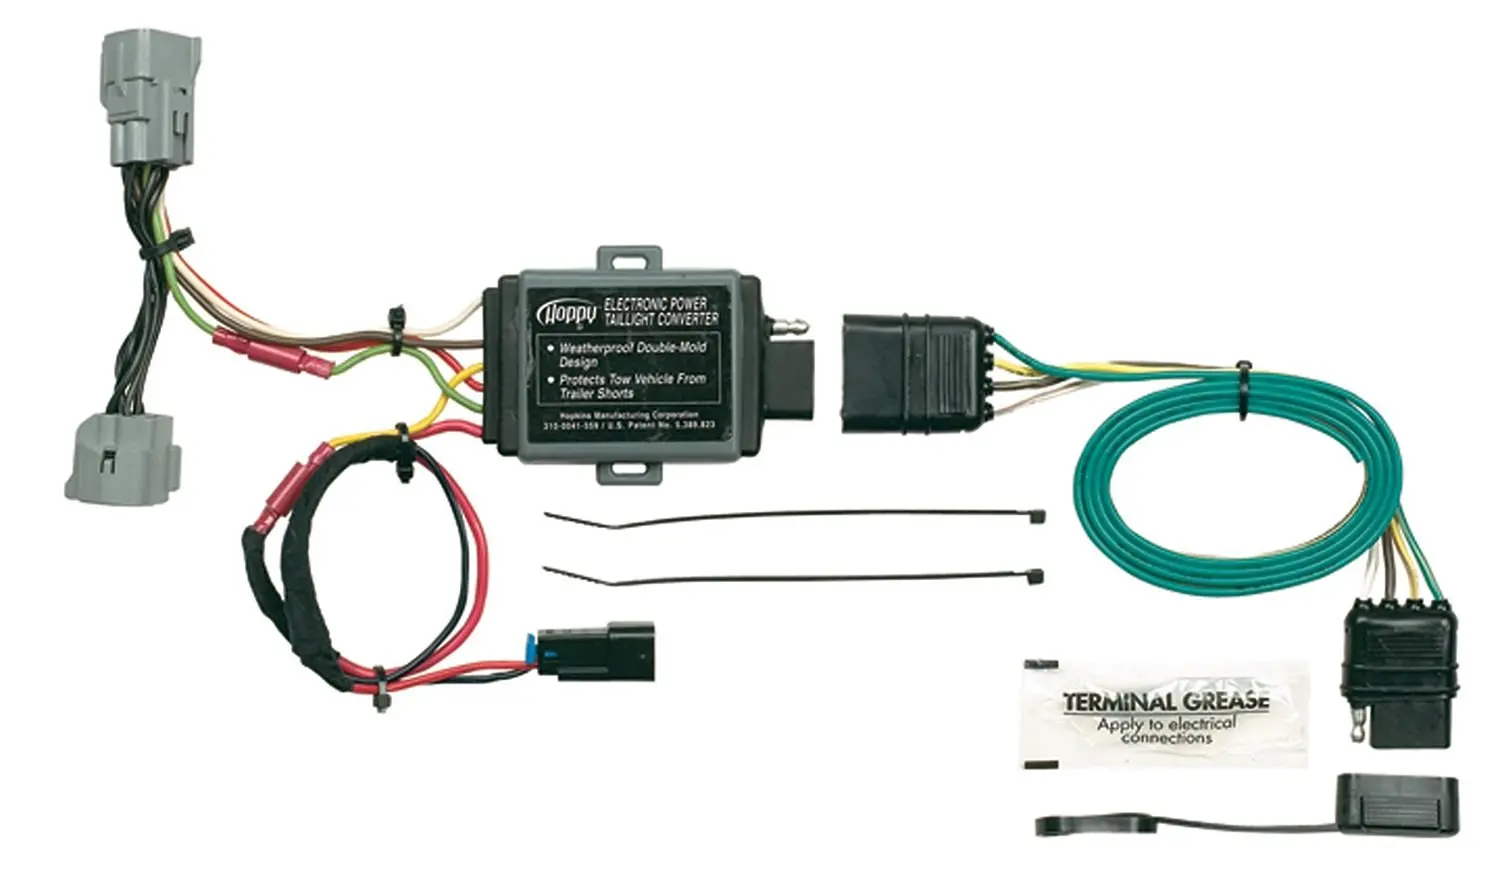 Advantages of Using a Plug-in Simple Wiring Kit